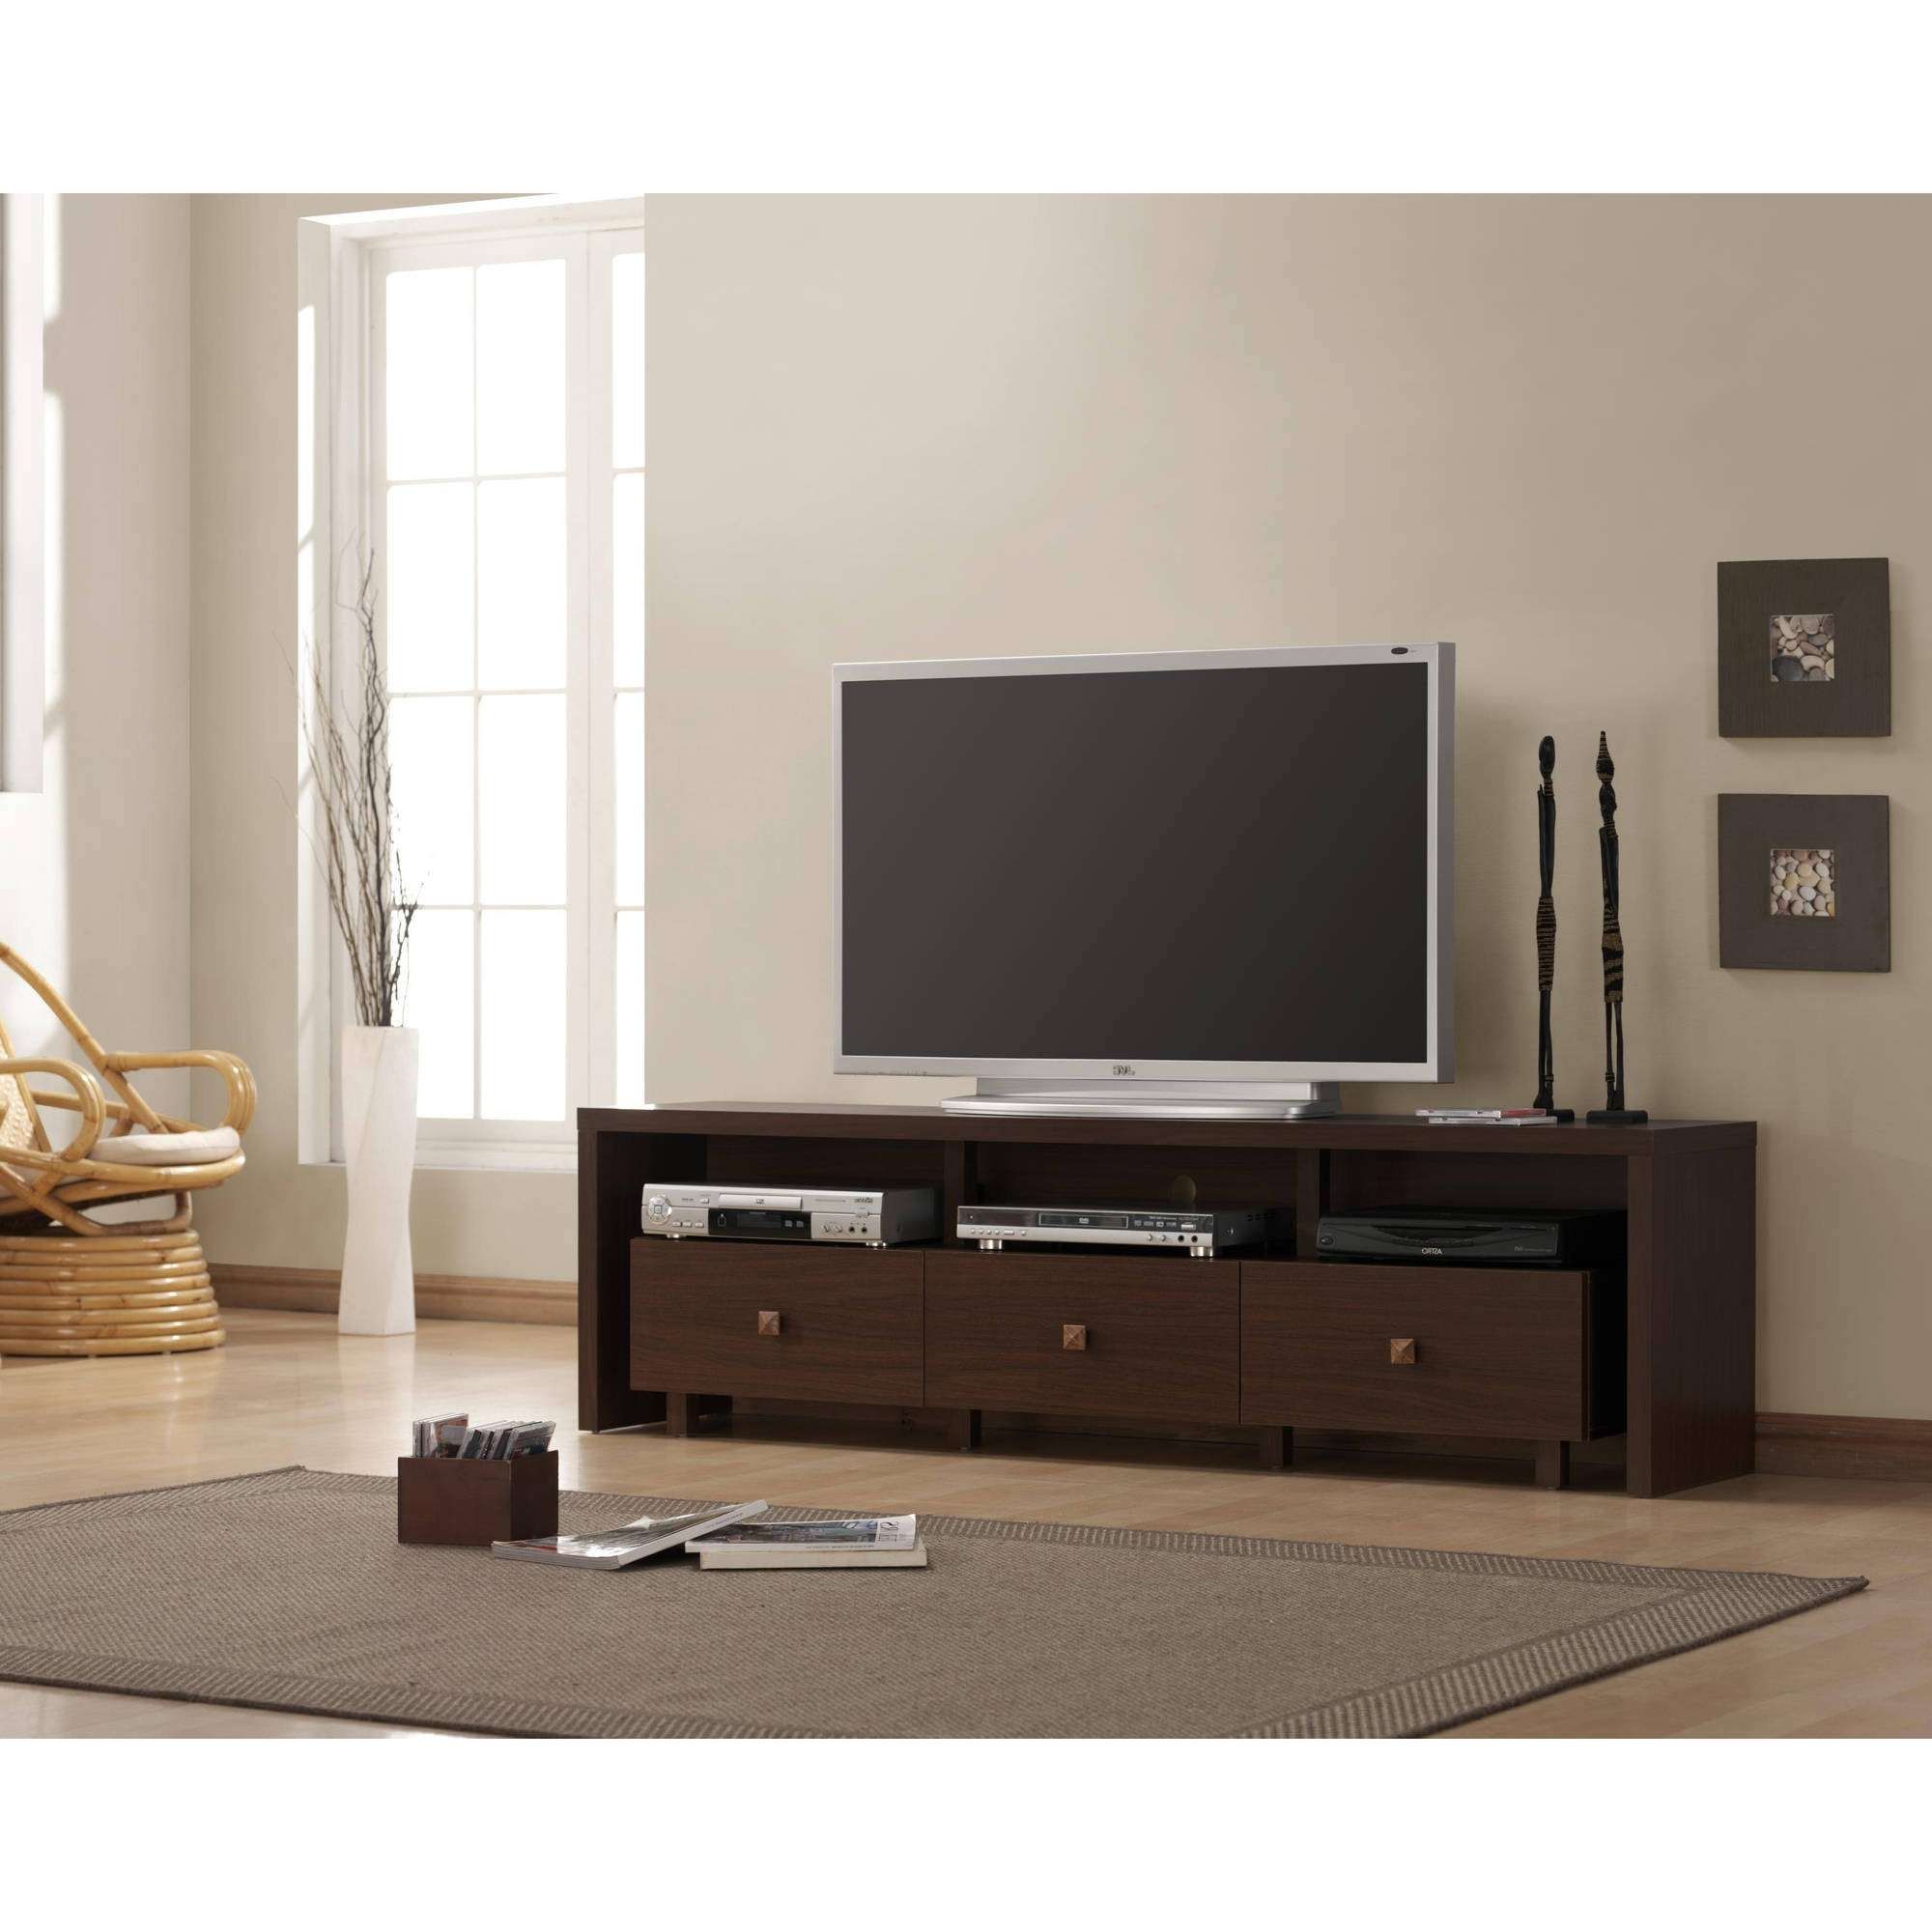 Double Nexera Allure In Tv Stand Along With Doors Nexera Allure Inside Tv Cabinets With Storage (View 11 of 20)